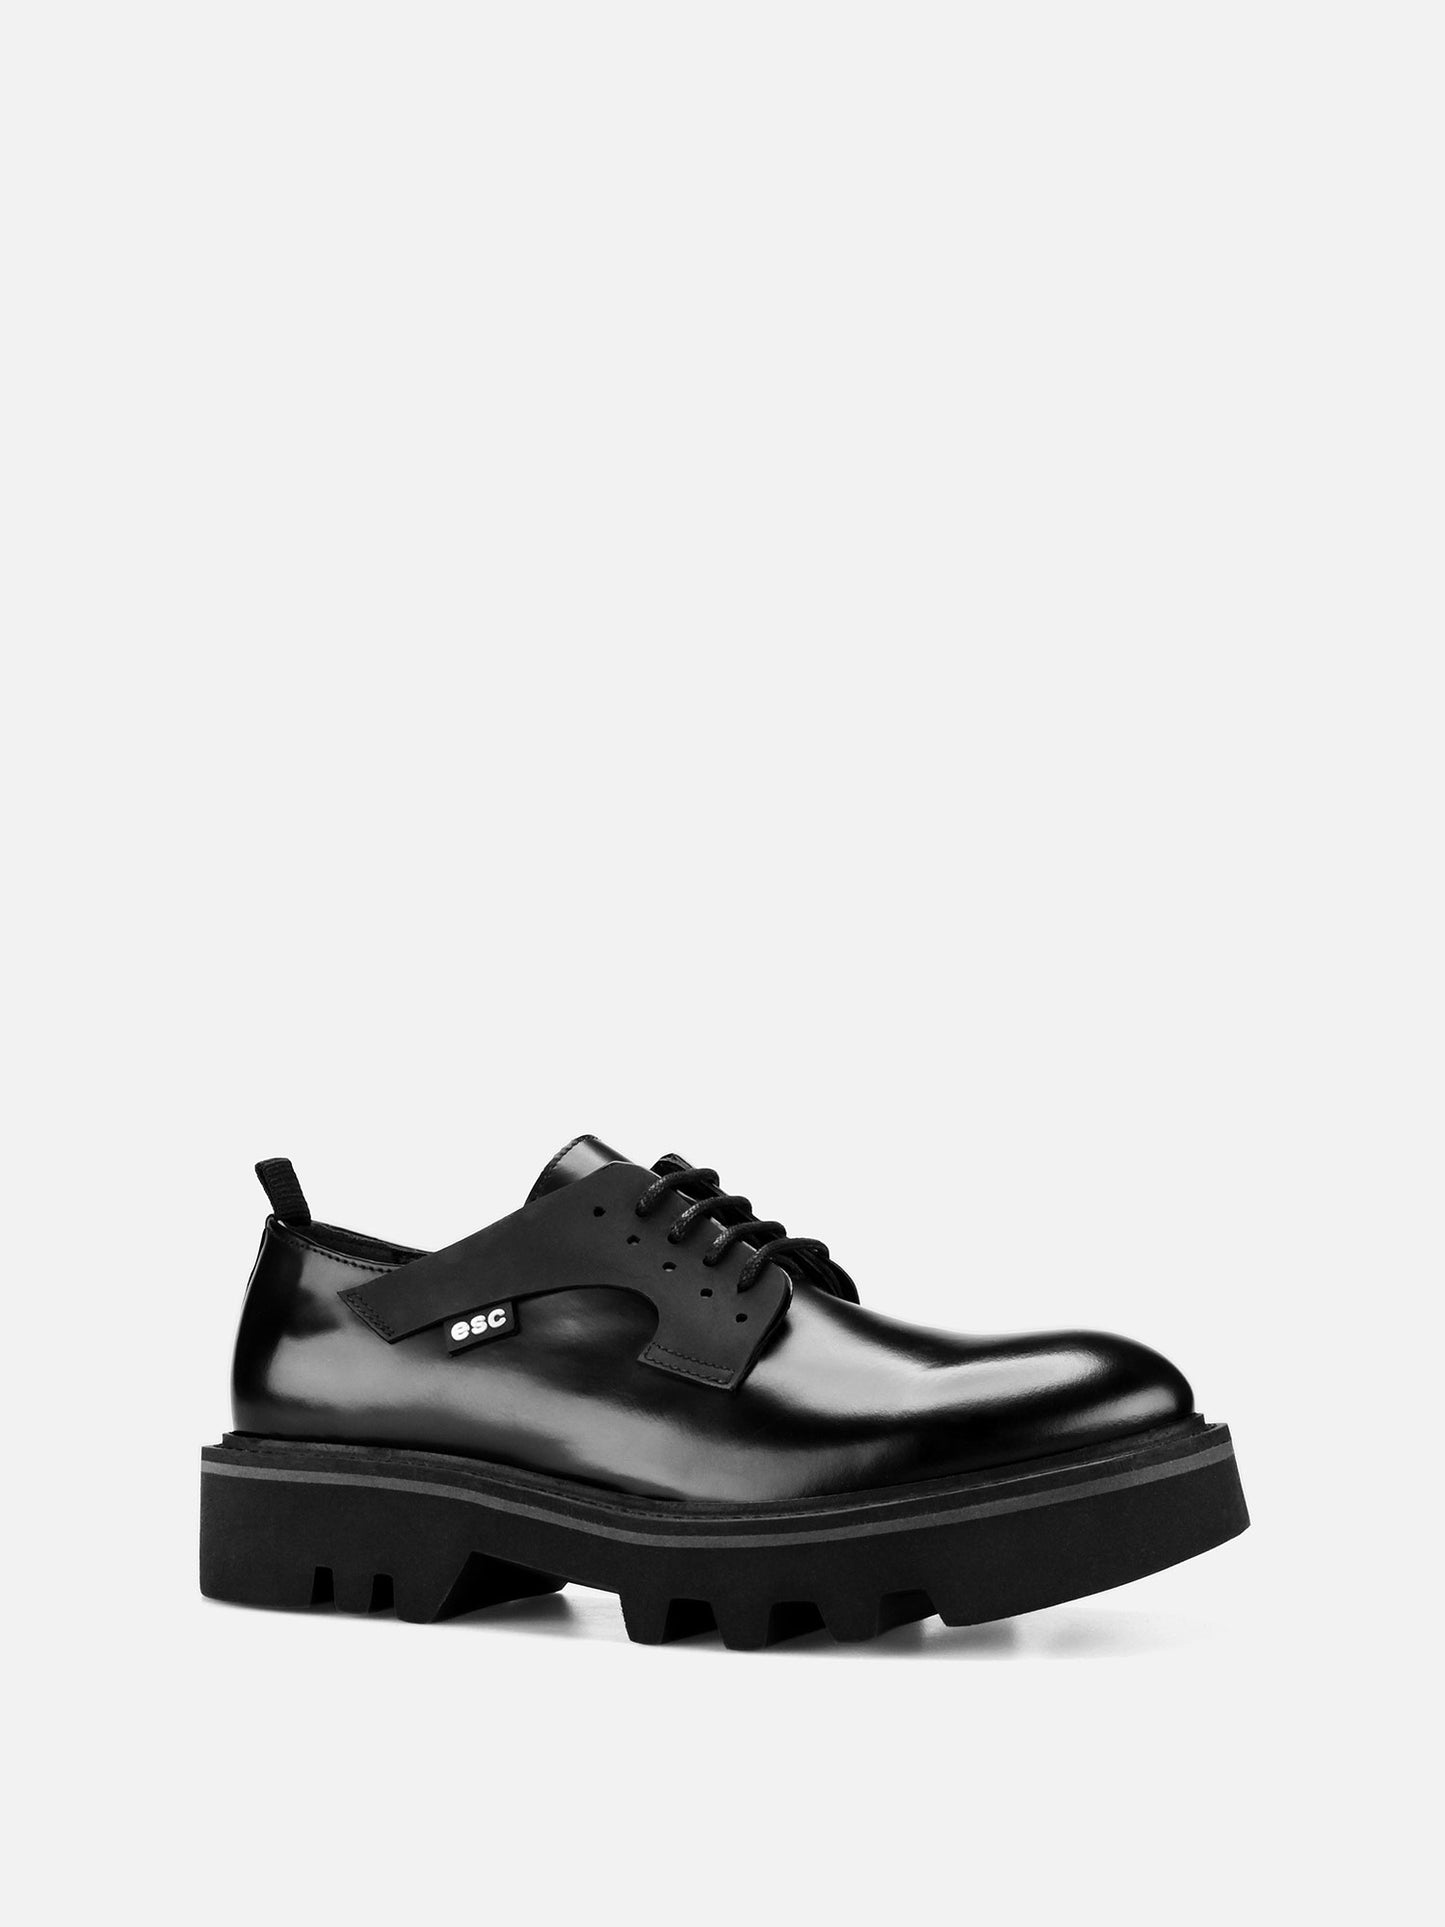 KATALL Leather Shoes - Black